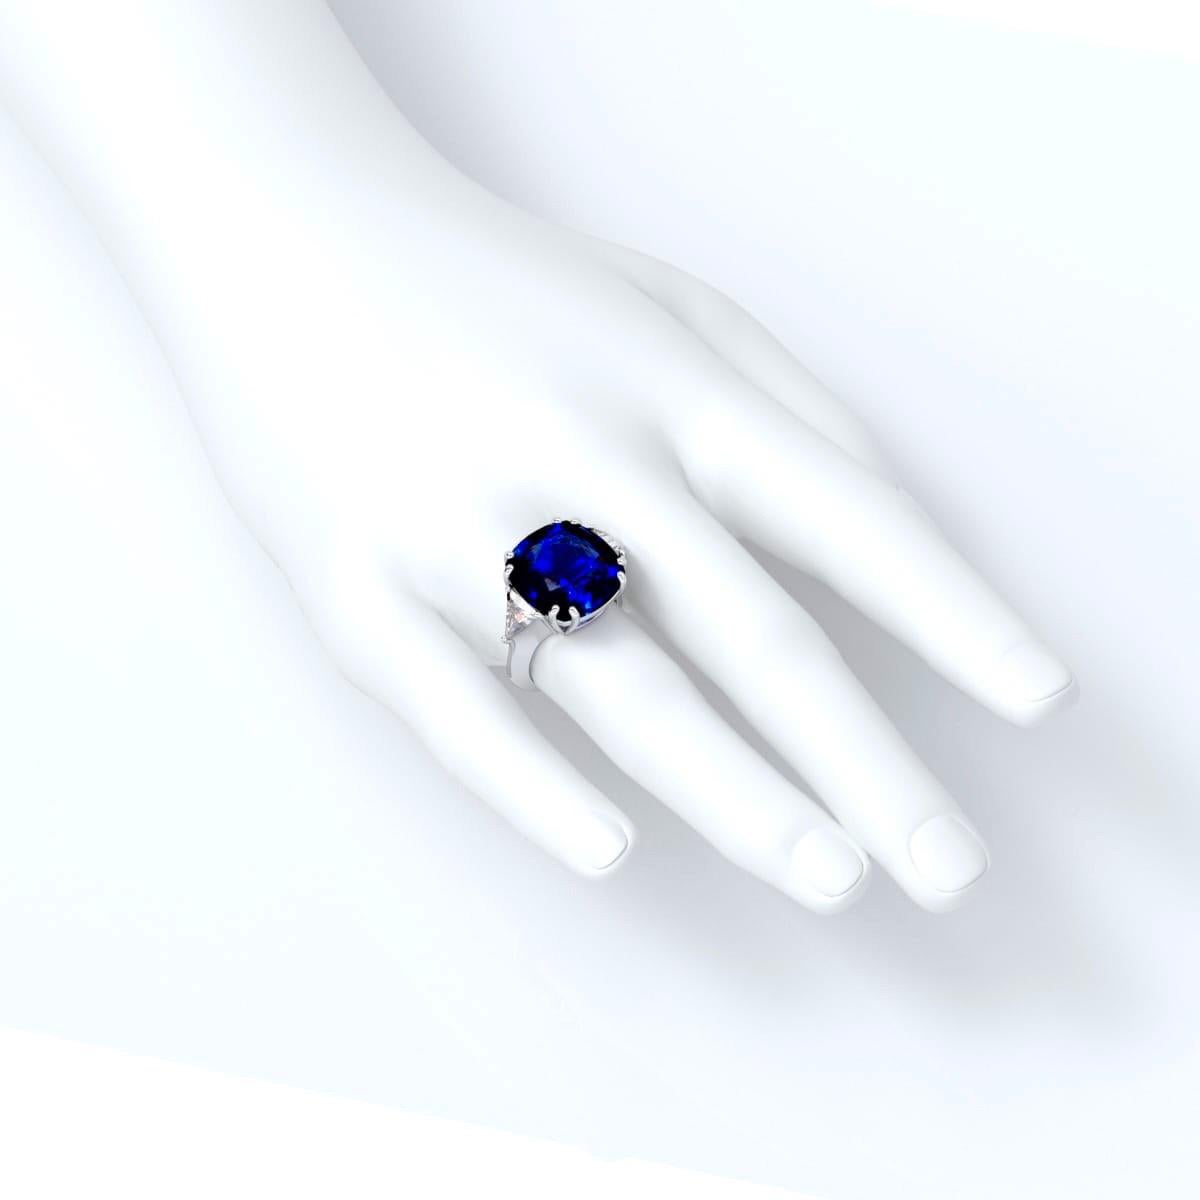 Approx total weight: 16.36ct 
Center Stone: 15.76cts 
Certified by C. Dunaigre as a Vivid blue Ceylon Sri Lanka Sapphire 
Diamond Color: D-E
Diamond Clarity: Vvs1
Cut: Excellent
Sapphire quality: Gorgeous deep blue color. The center stone is full of